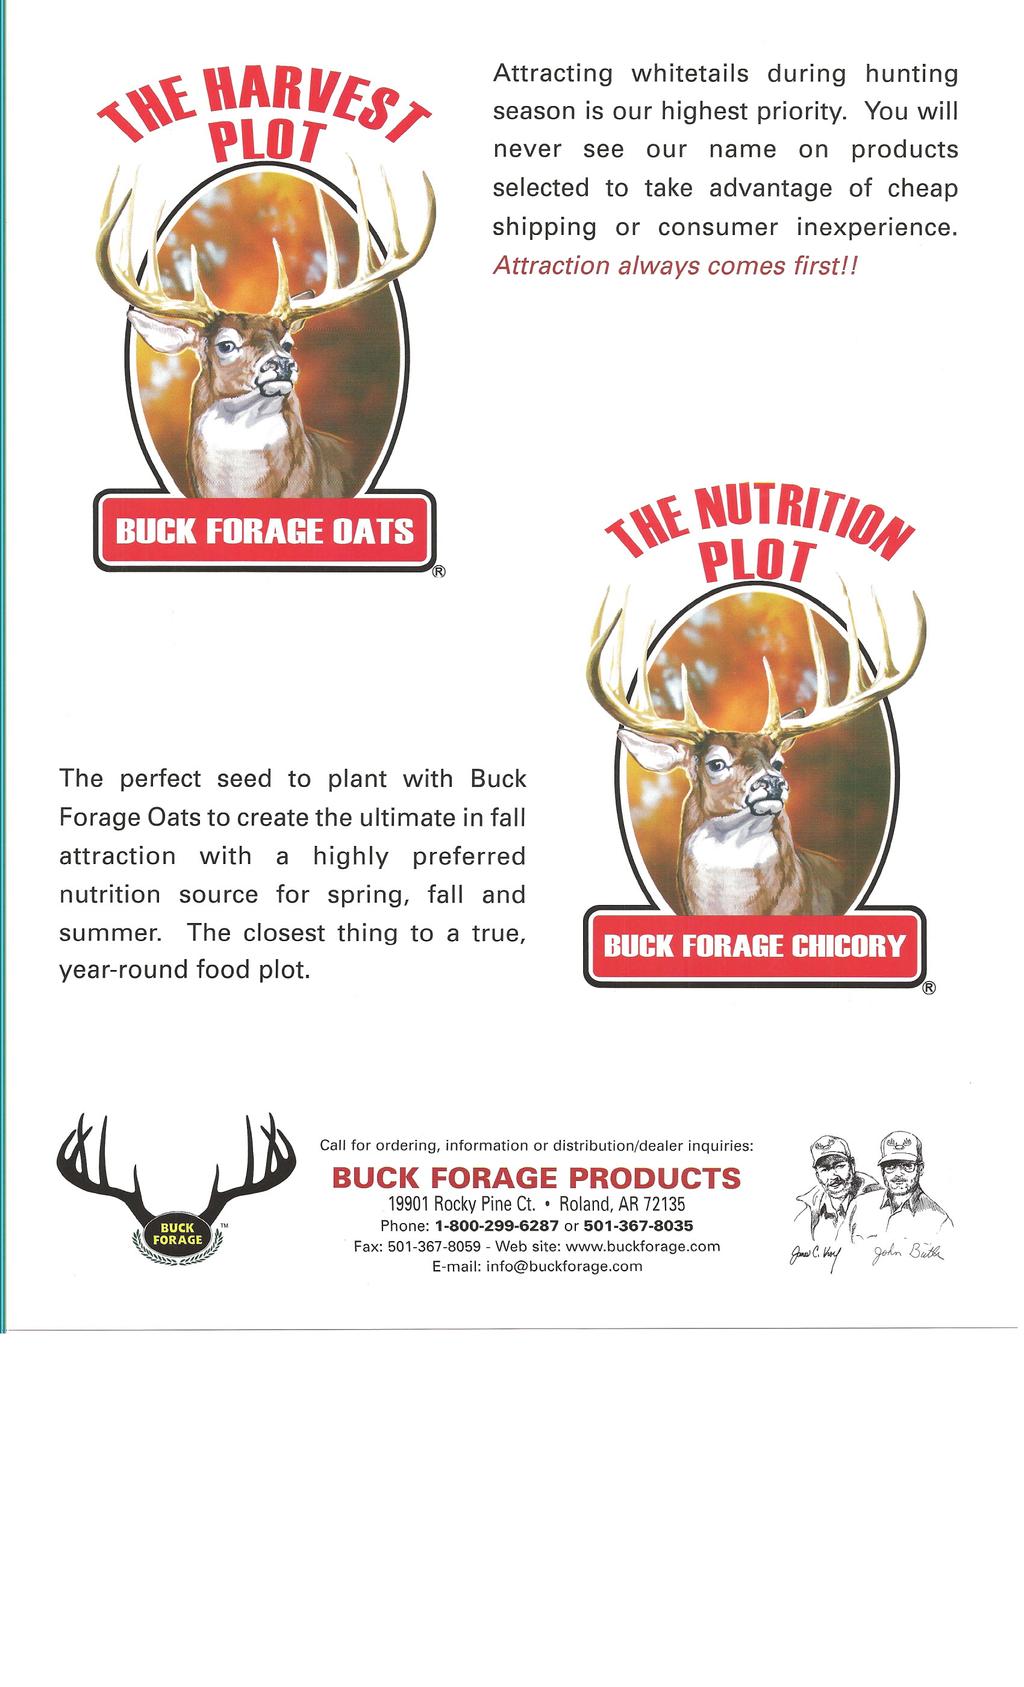 Attracting whitetails during hunting season is our highest priority. You will never see our name on products selected to take advantage of cheap shipping or consumer inexperience.